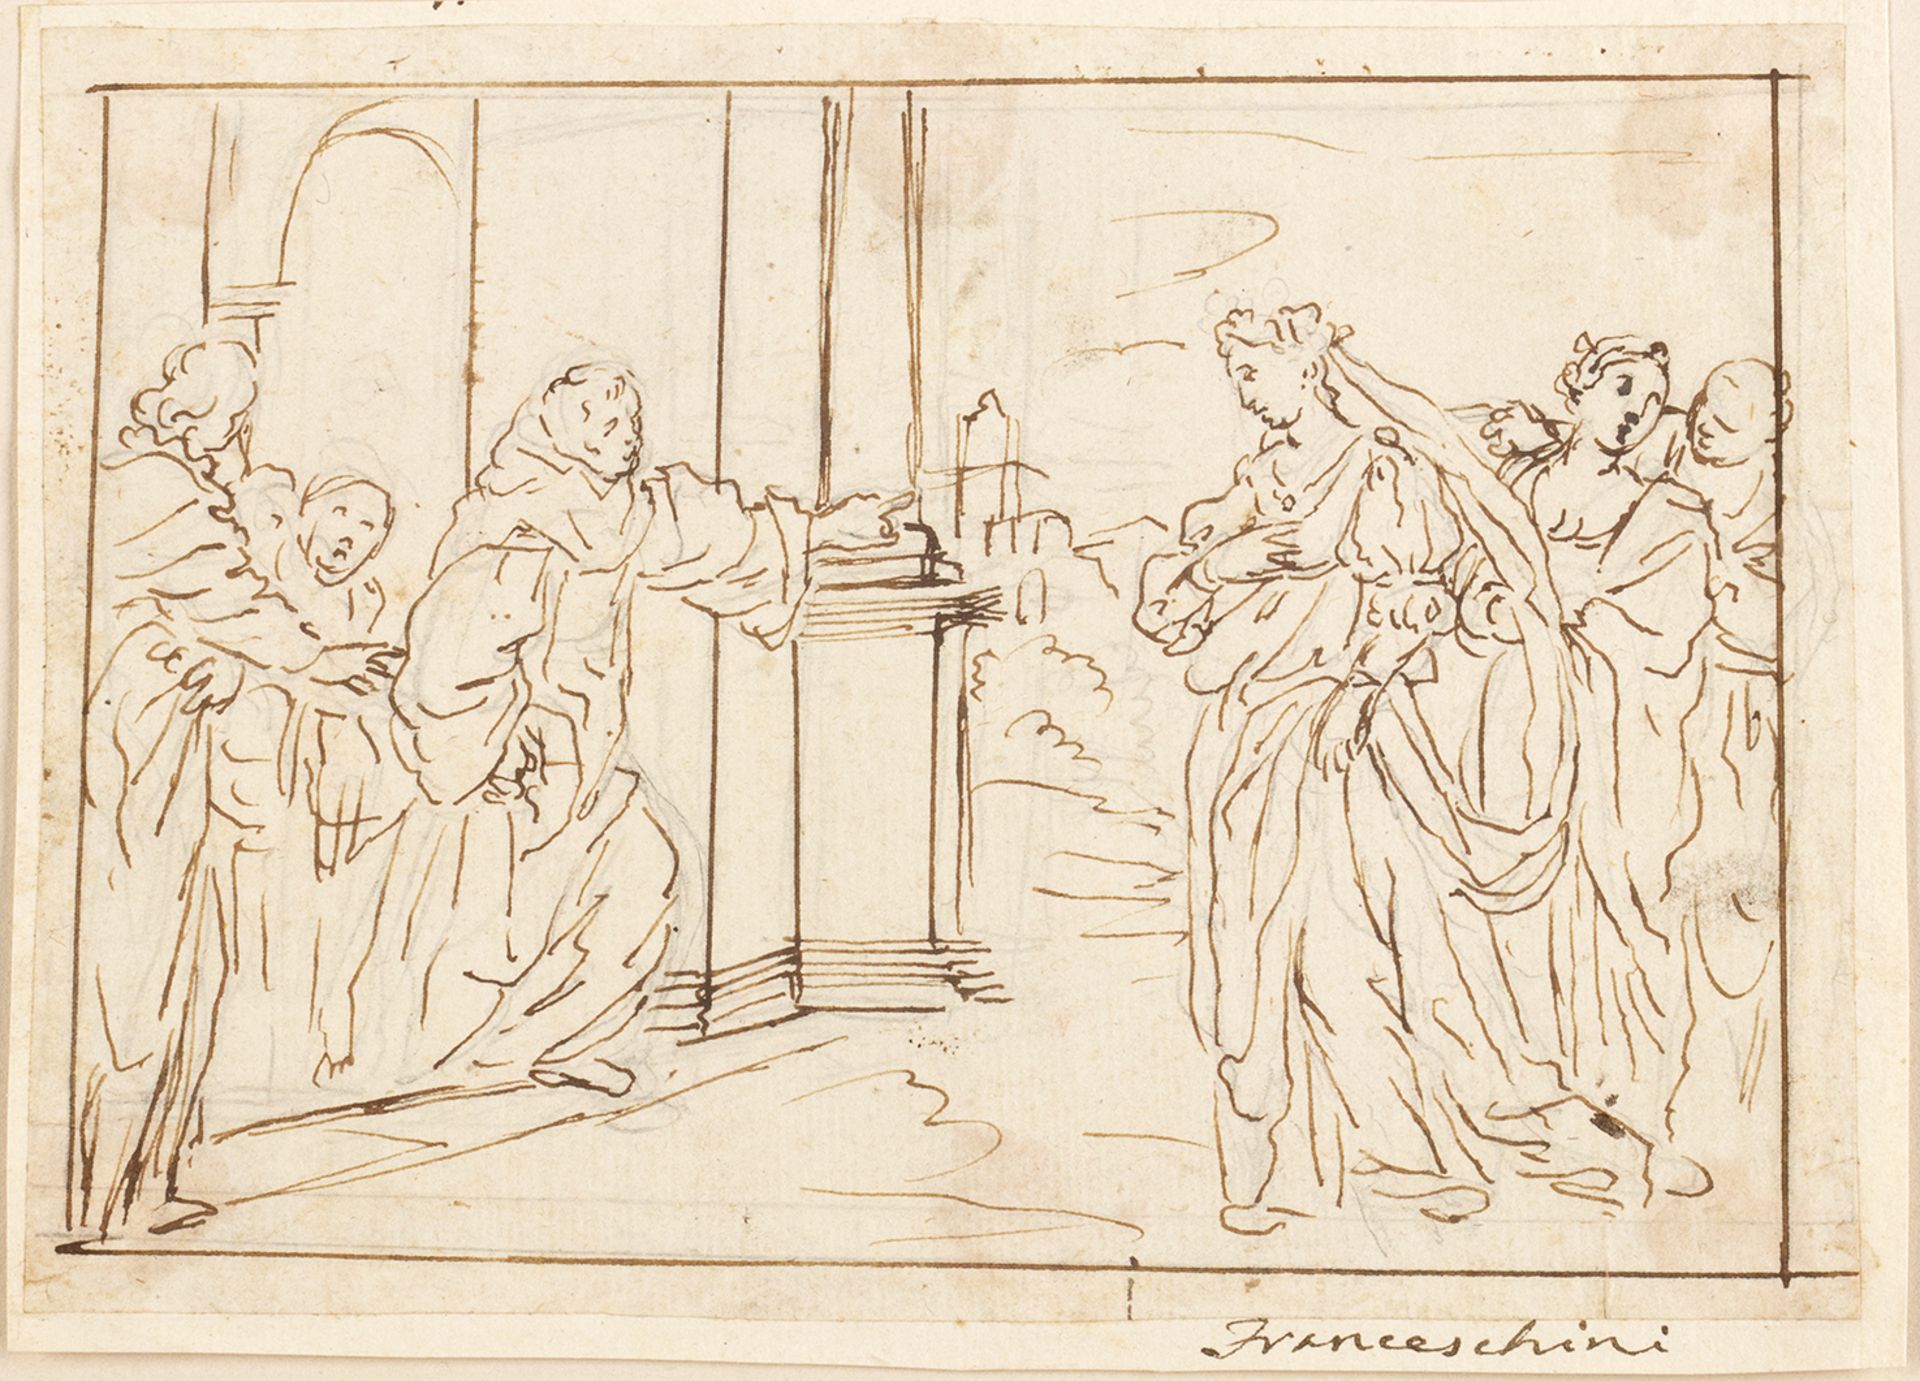 EMILIAN SCHOOL, 18th CENTURY - - Two young women received in a monastery - Pen [...]